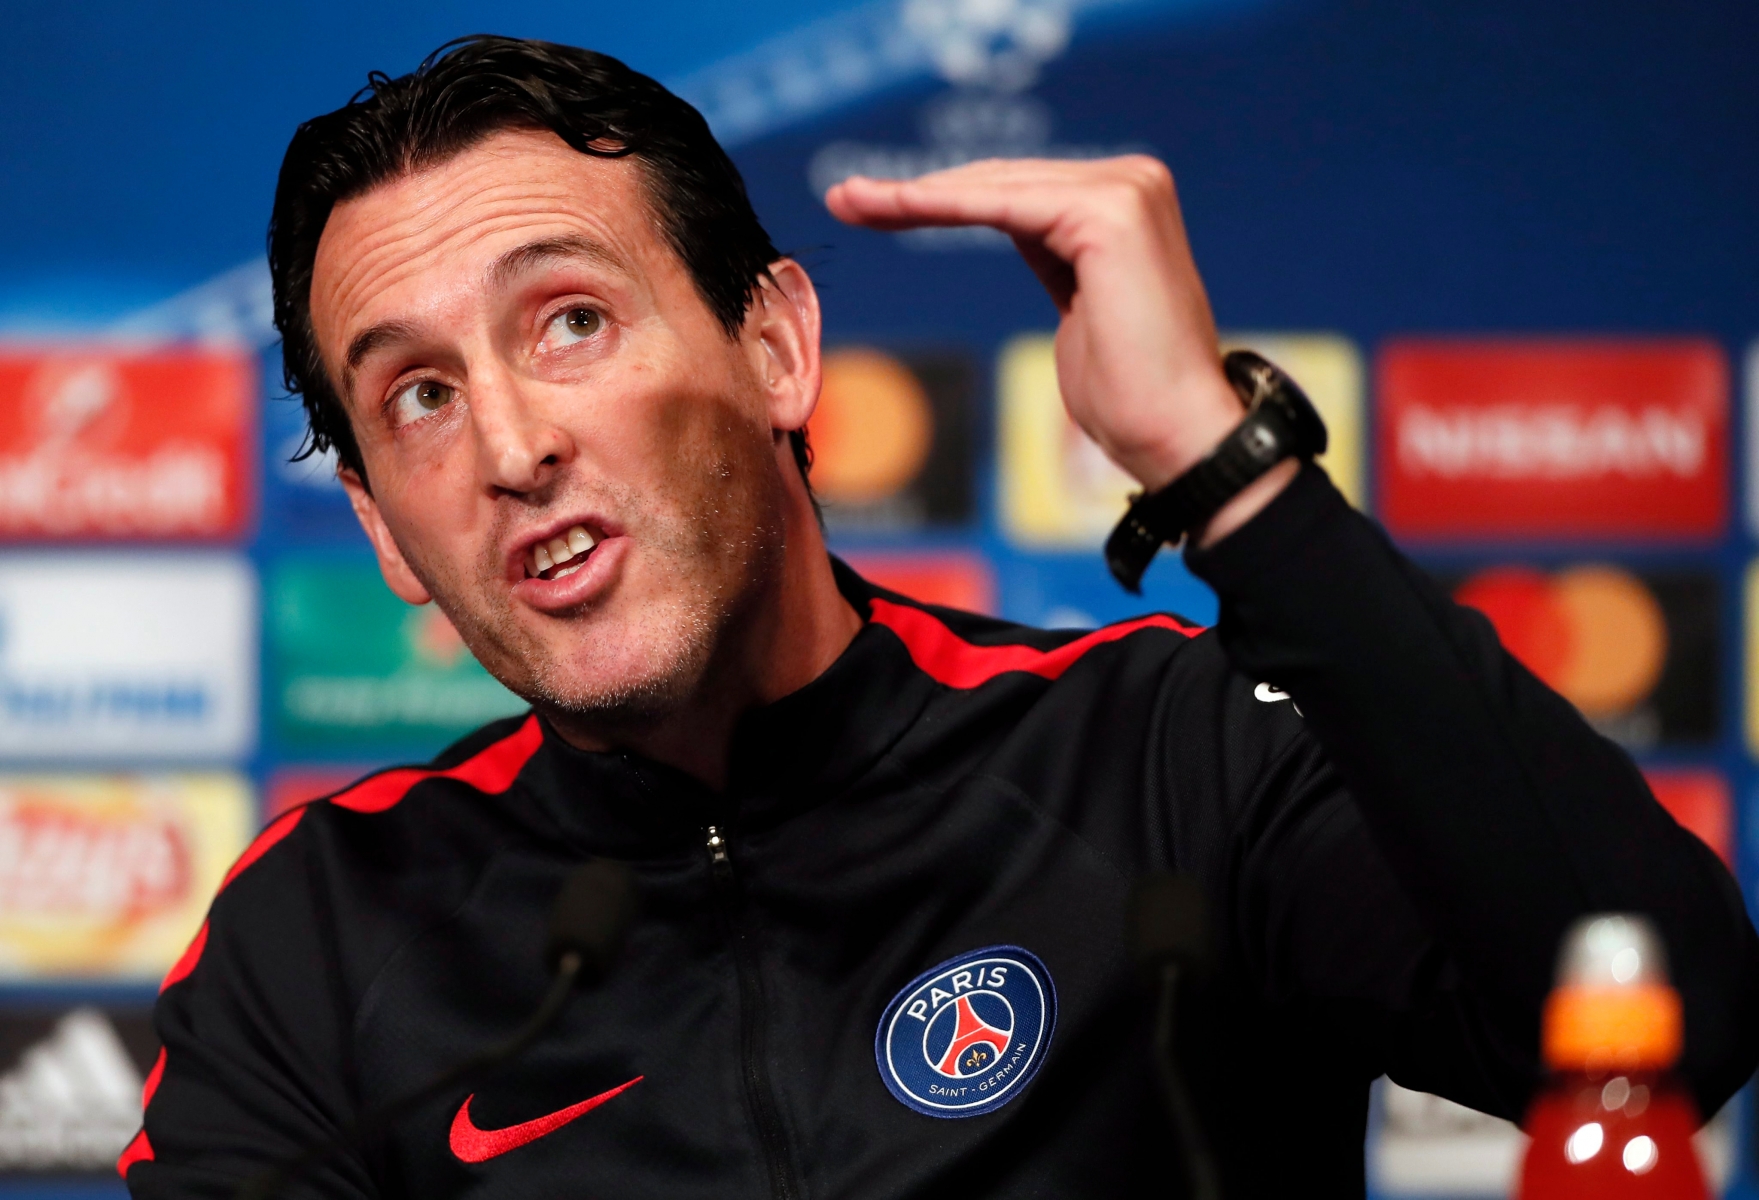 epa05590305 Paris Saint Germain head coach Unai Emery speaks to media during a press conference at the Parc des Princes stadium in Paris, France, 18 October 2016. Paris Saint Germain (PSG) will face FC Basel on 19 October during their Champions league group A match.  EPA/IAN LANGSDON FRANCE SOCCER UEFA CHAMPIONS LEAGUE